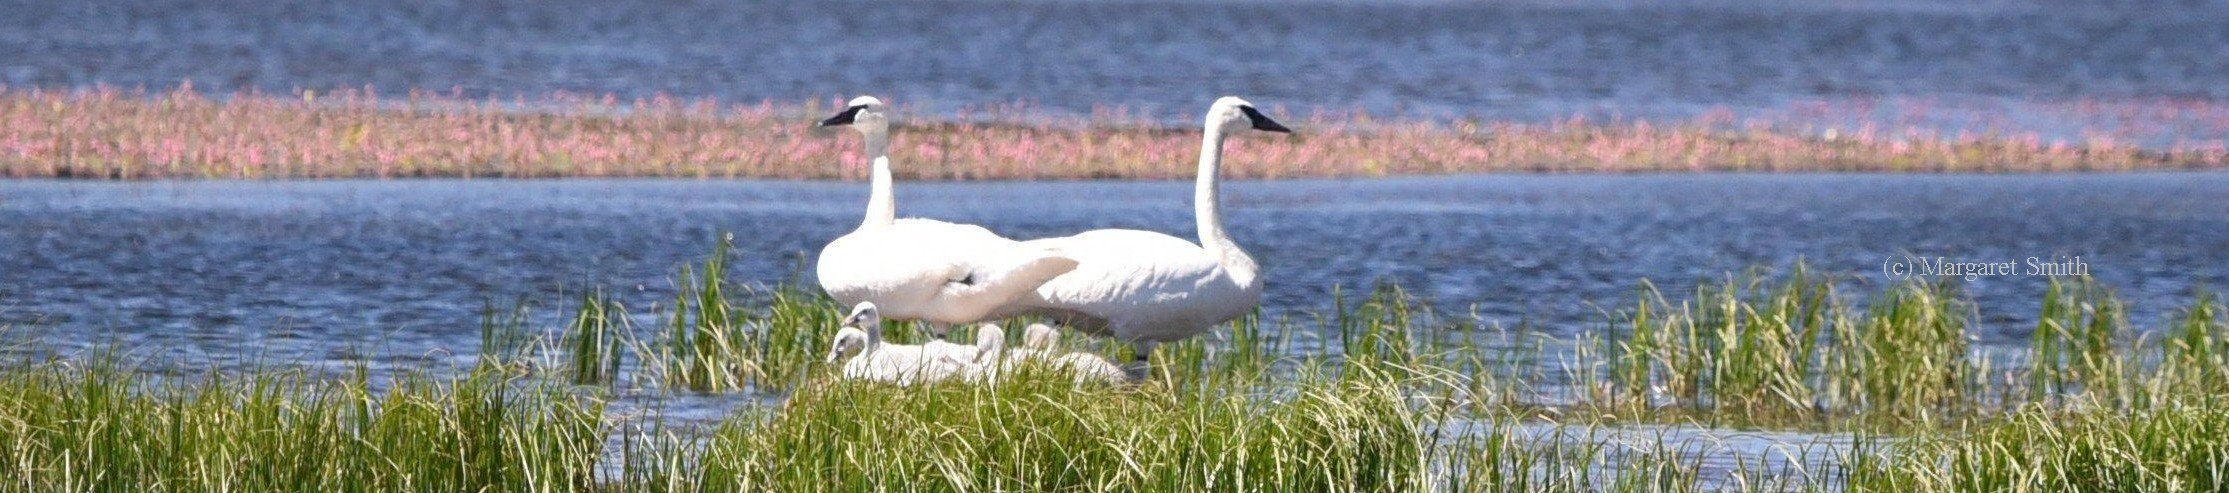 Your Swan Gift Shop purchase helps support swan conservation programs of The Trumpeter Swan Society